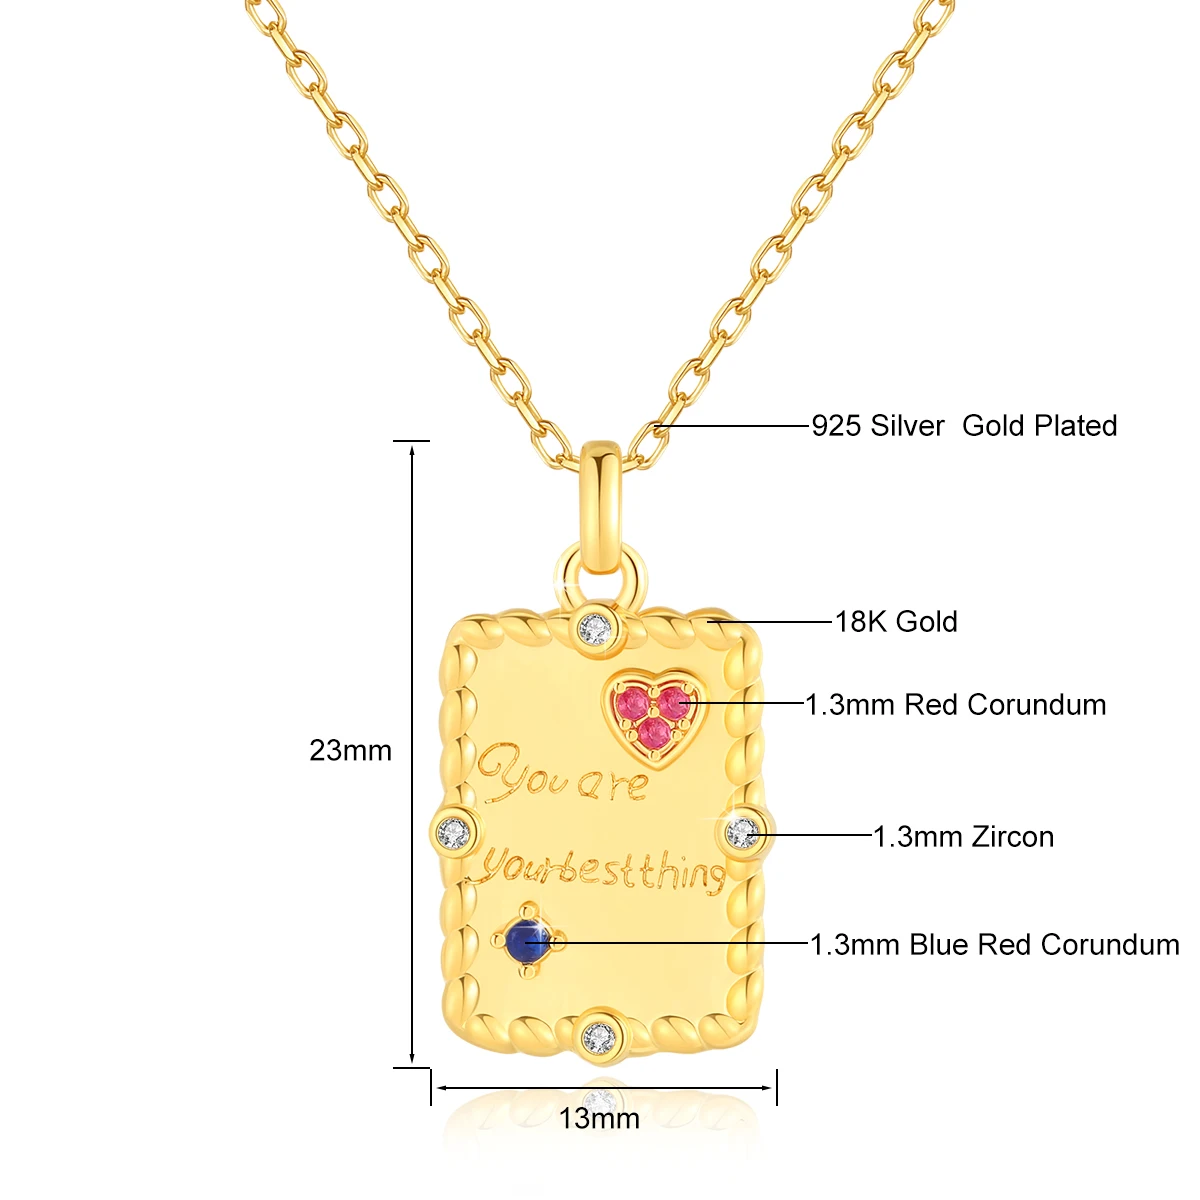 Real 18K Gold Red Corundum Pendant Necklaces for Women Anniversary Party Gift AU750 Bookmark Fine Jewelry With Certificate